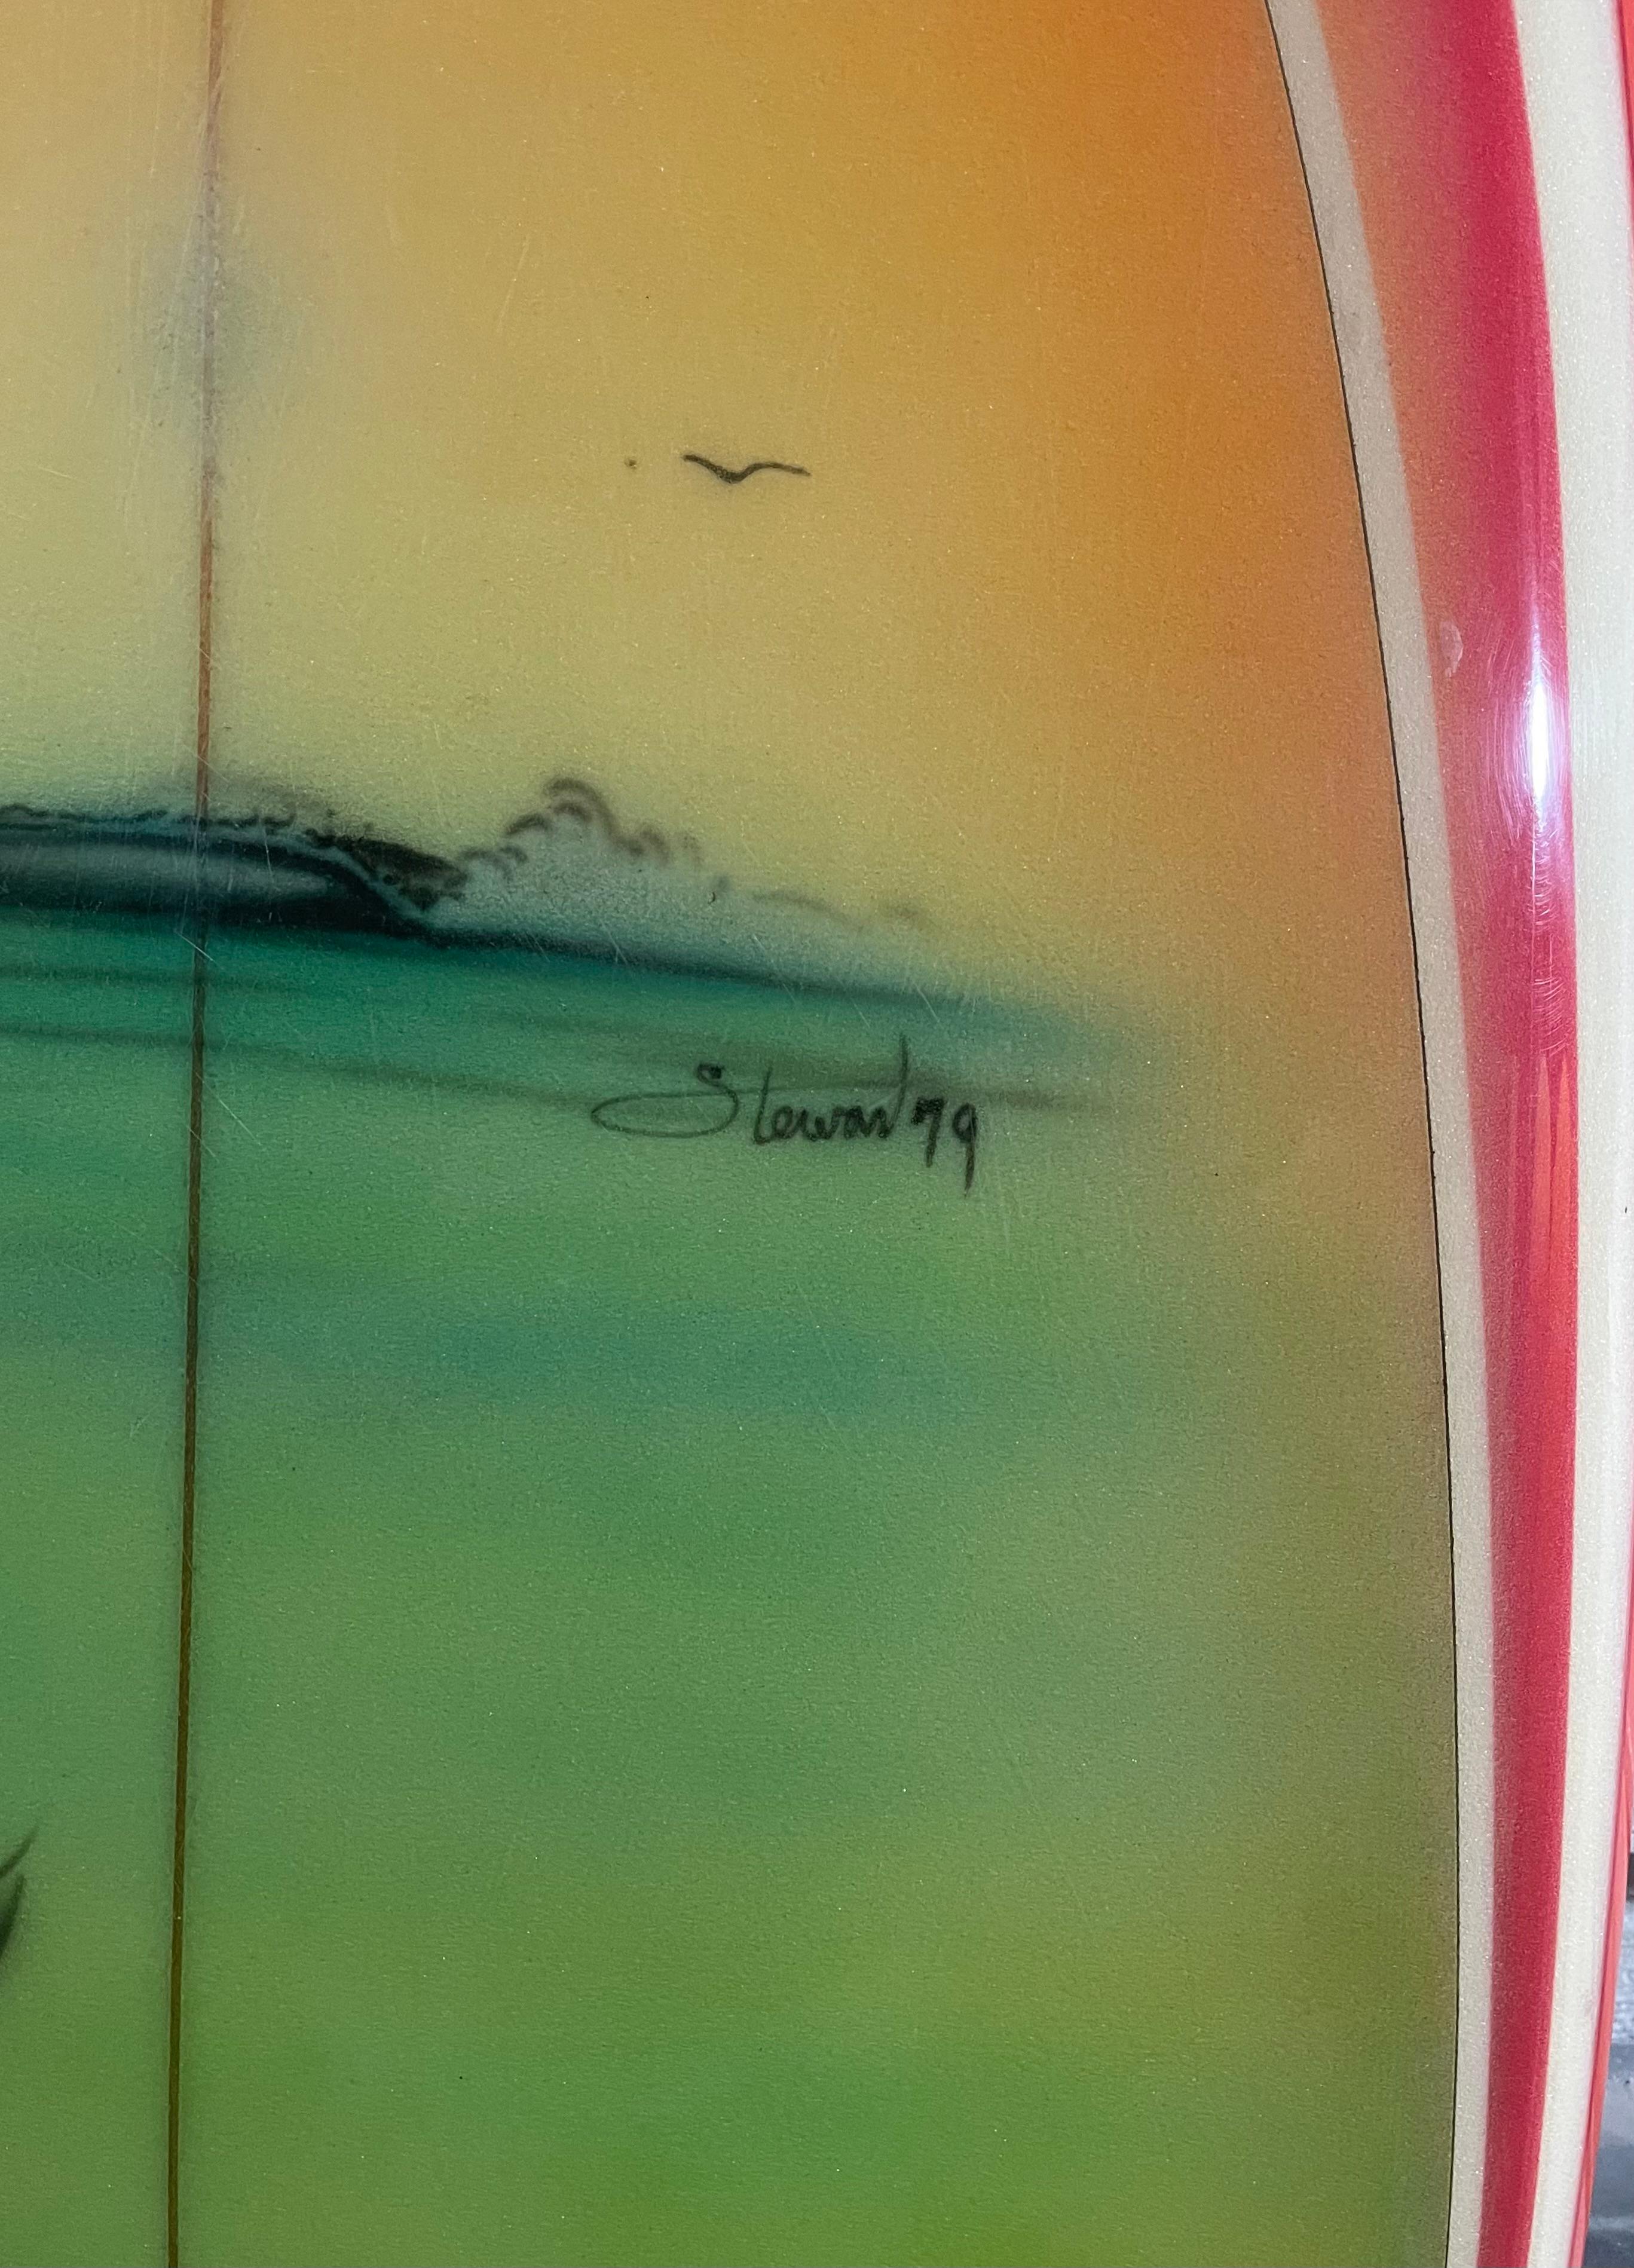 1979 Vintage Ocean Pacific Wave Mural Surfboard with artwork by Bill Stewart In Good Condition For Sale In Haleiwa, HI